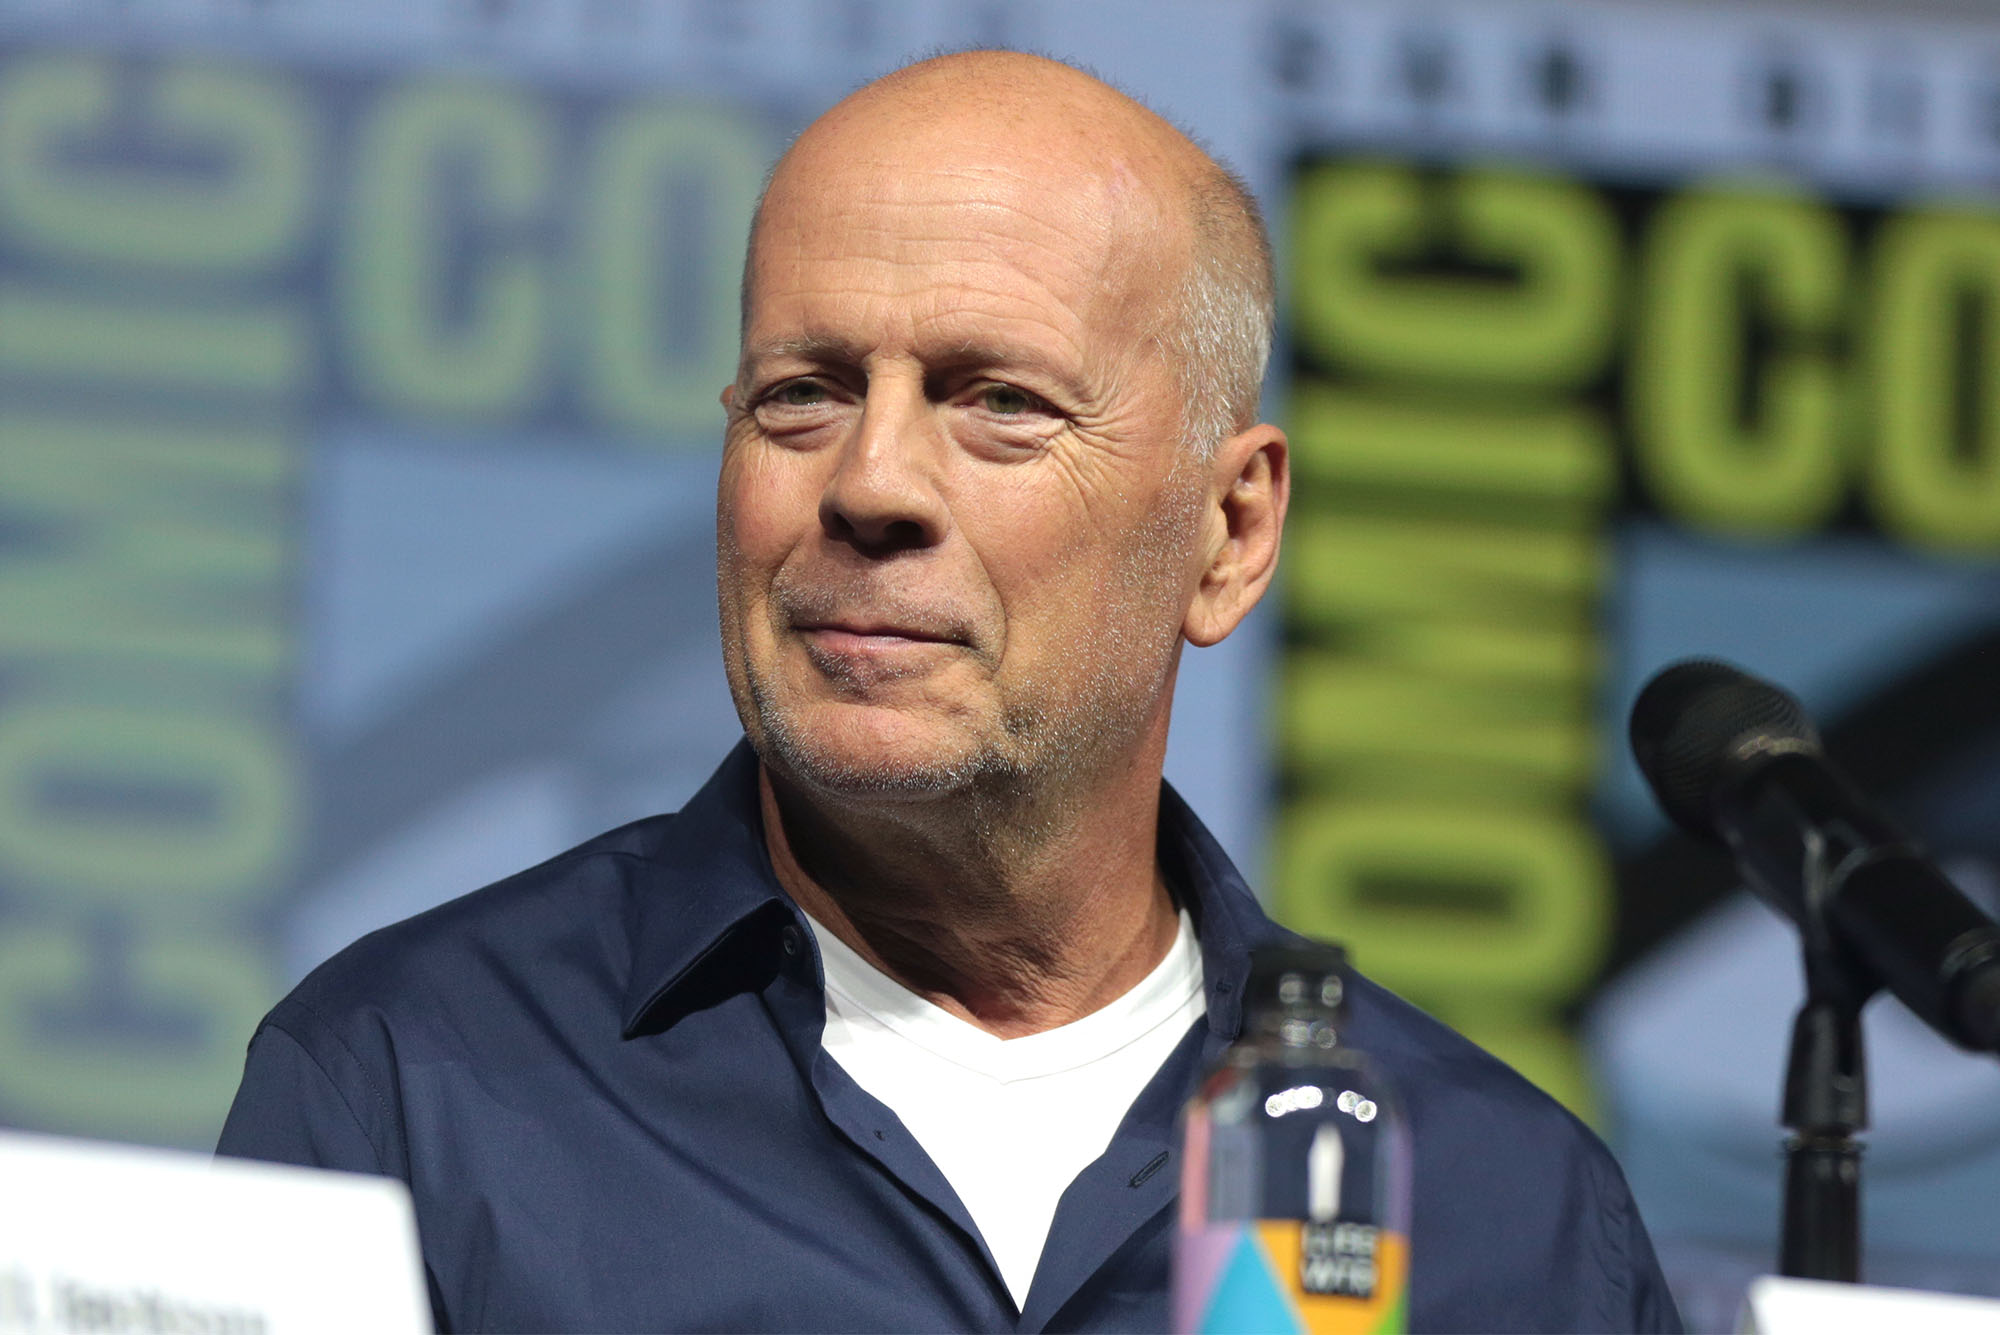 Bruce Willis at a speaking engagement wearing a blue collared shirt with a white undershirt